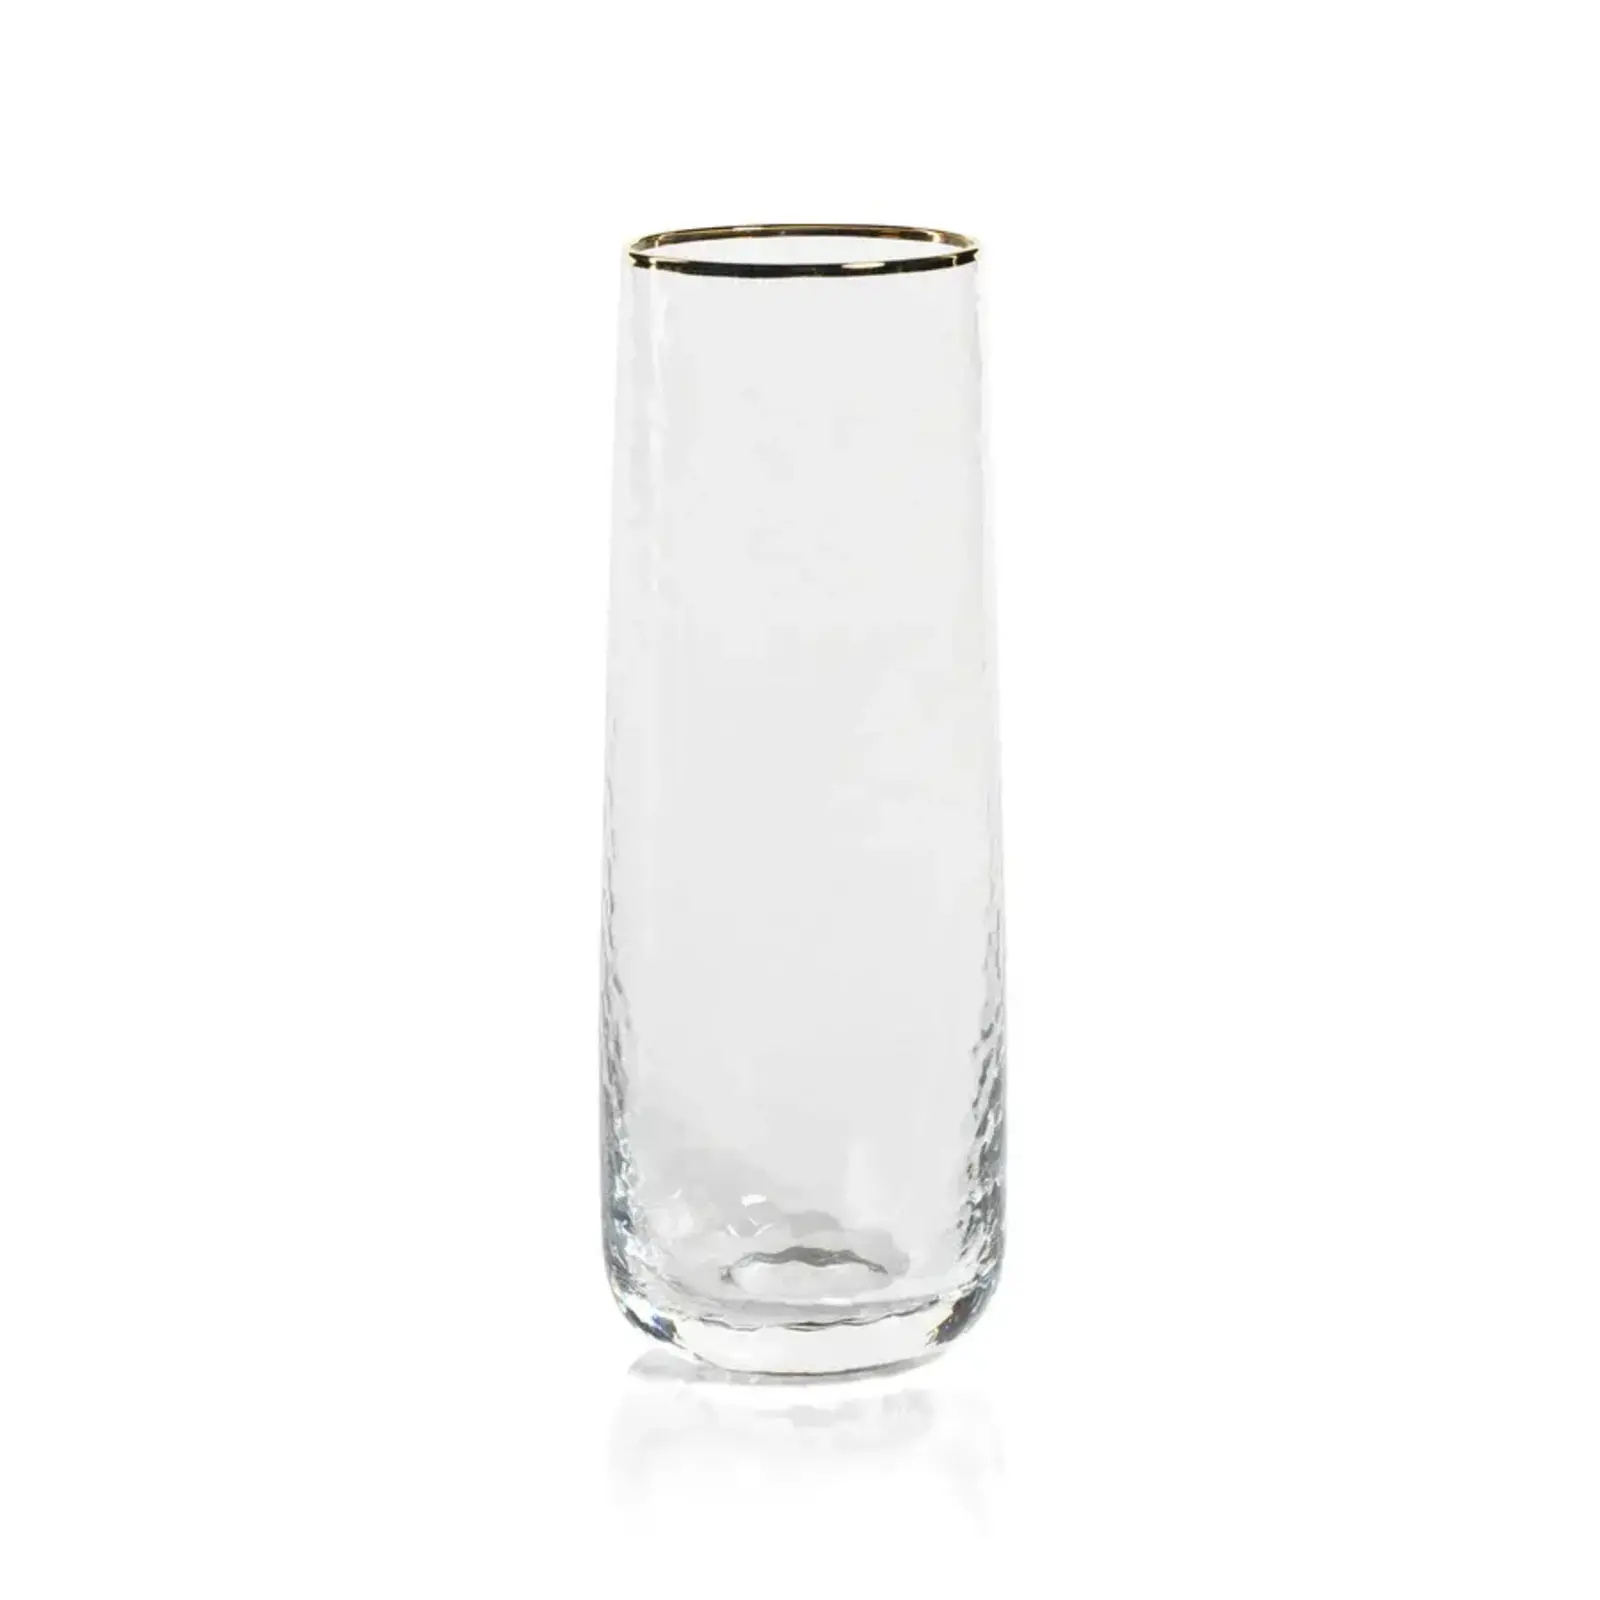 Zodax Negroni Hammered Stemless Flute  CH-6215 loading=